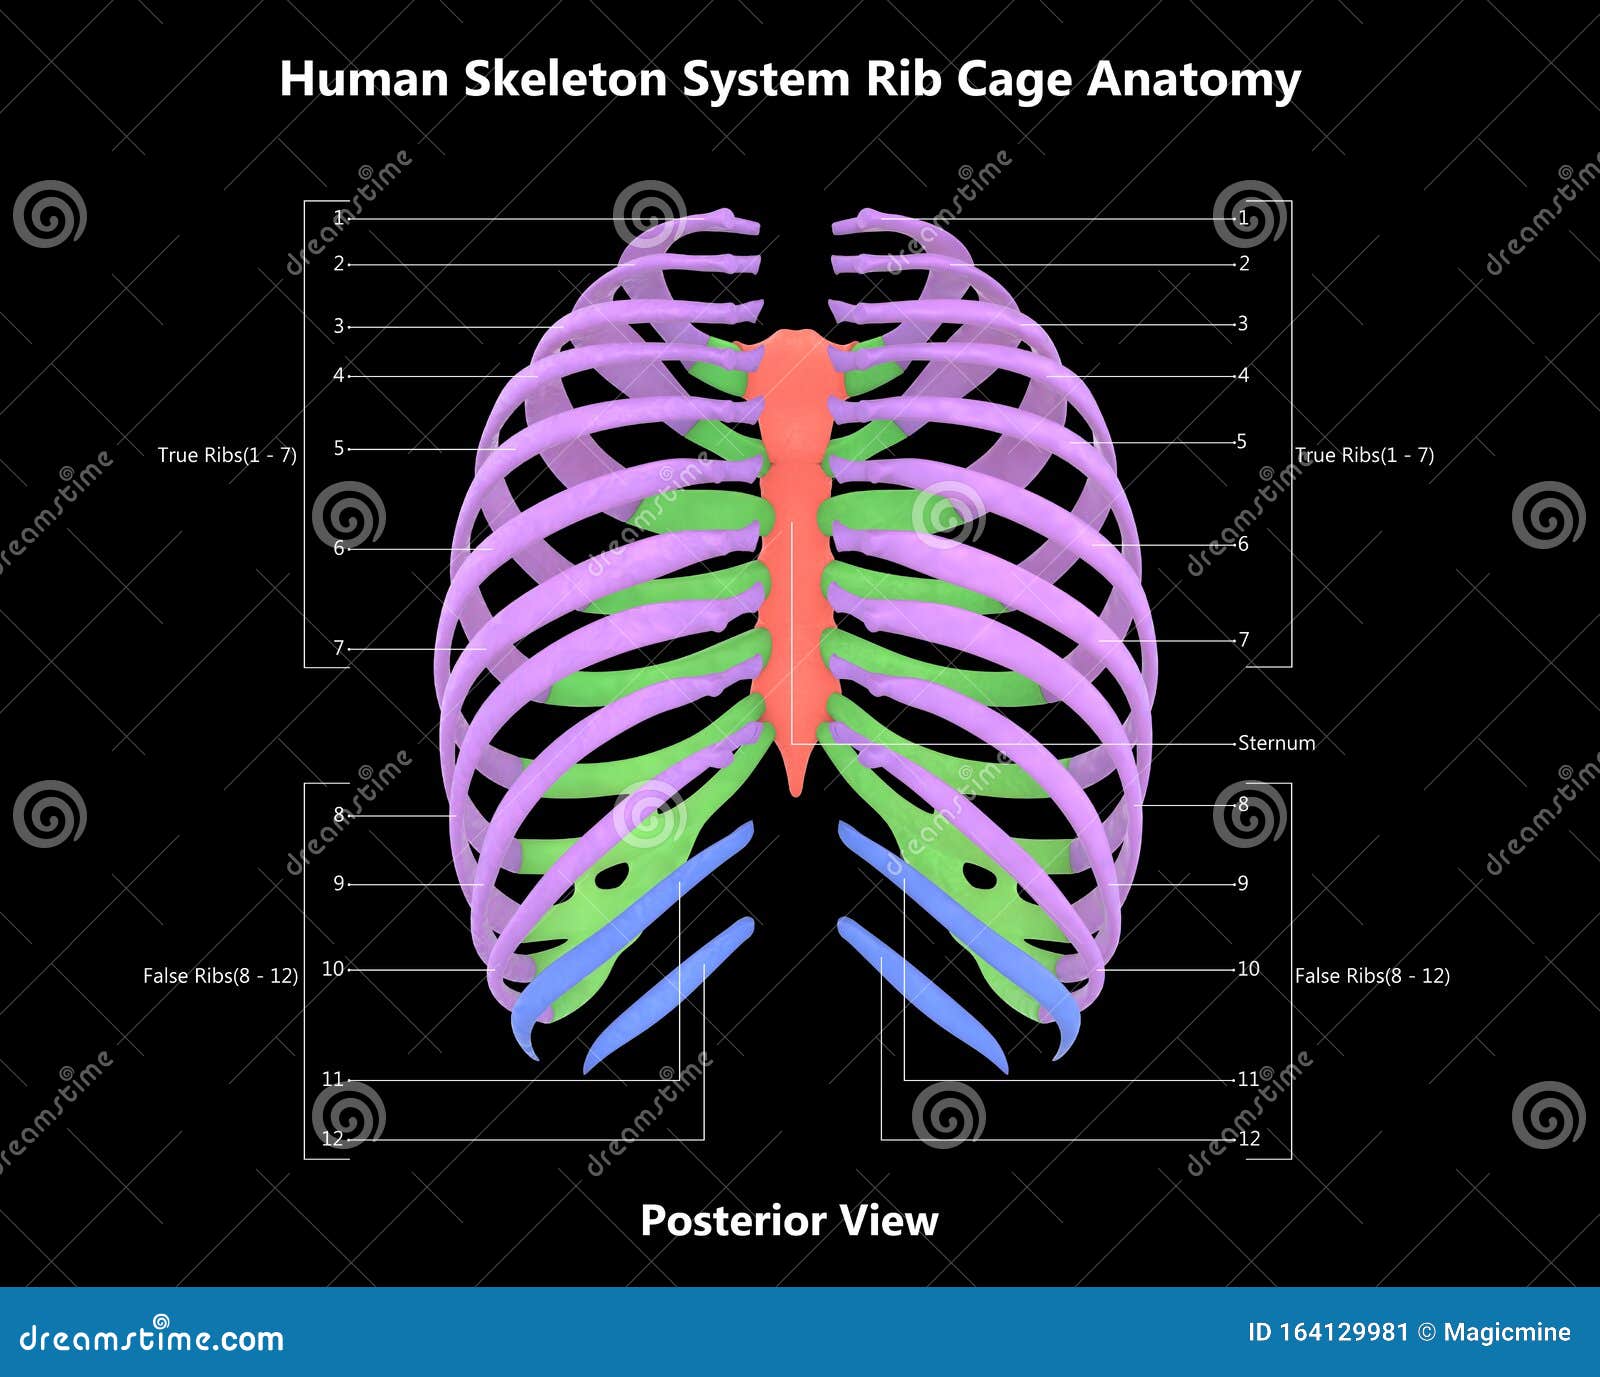 Rib Cage Of Human Skeleton System Anatomy With Detailed Labels Posterior View Stock Illustration ...